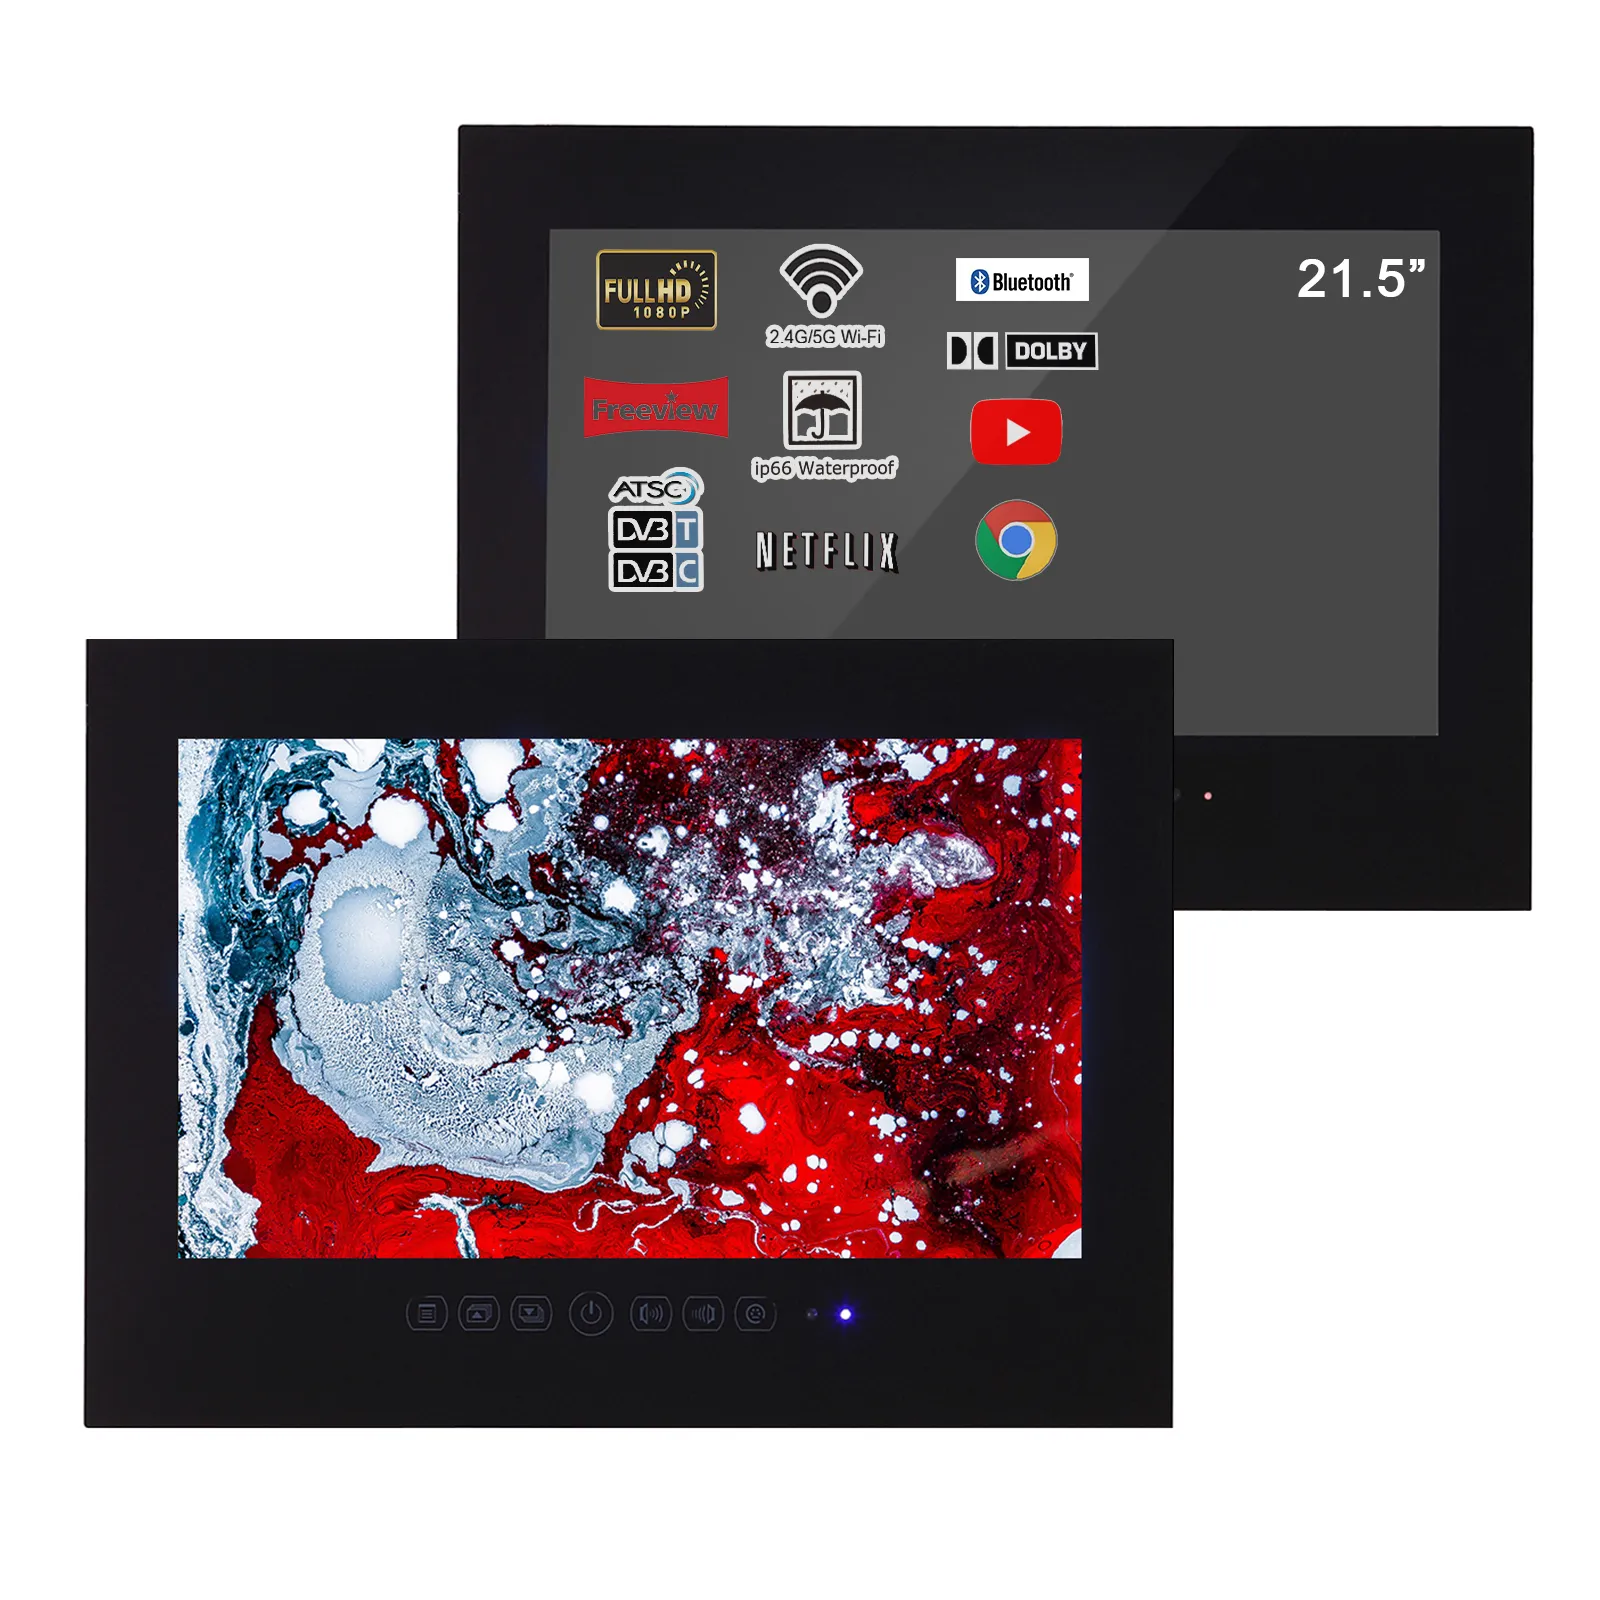 Soulaca 21.5 inch Black Bathroom LED Television Smart Android Hotel Waterproof TV Glass Panel Frameless Full HD 1080